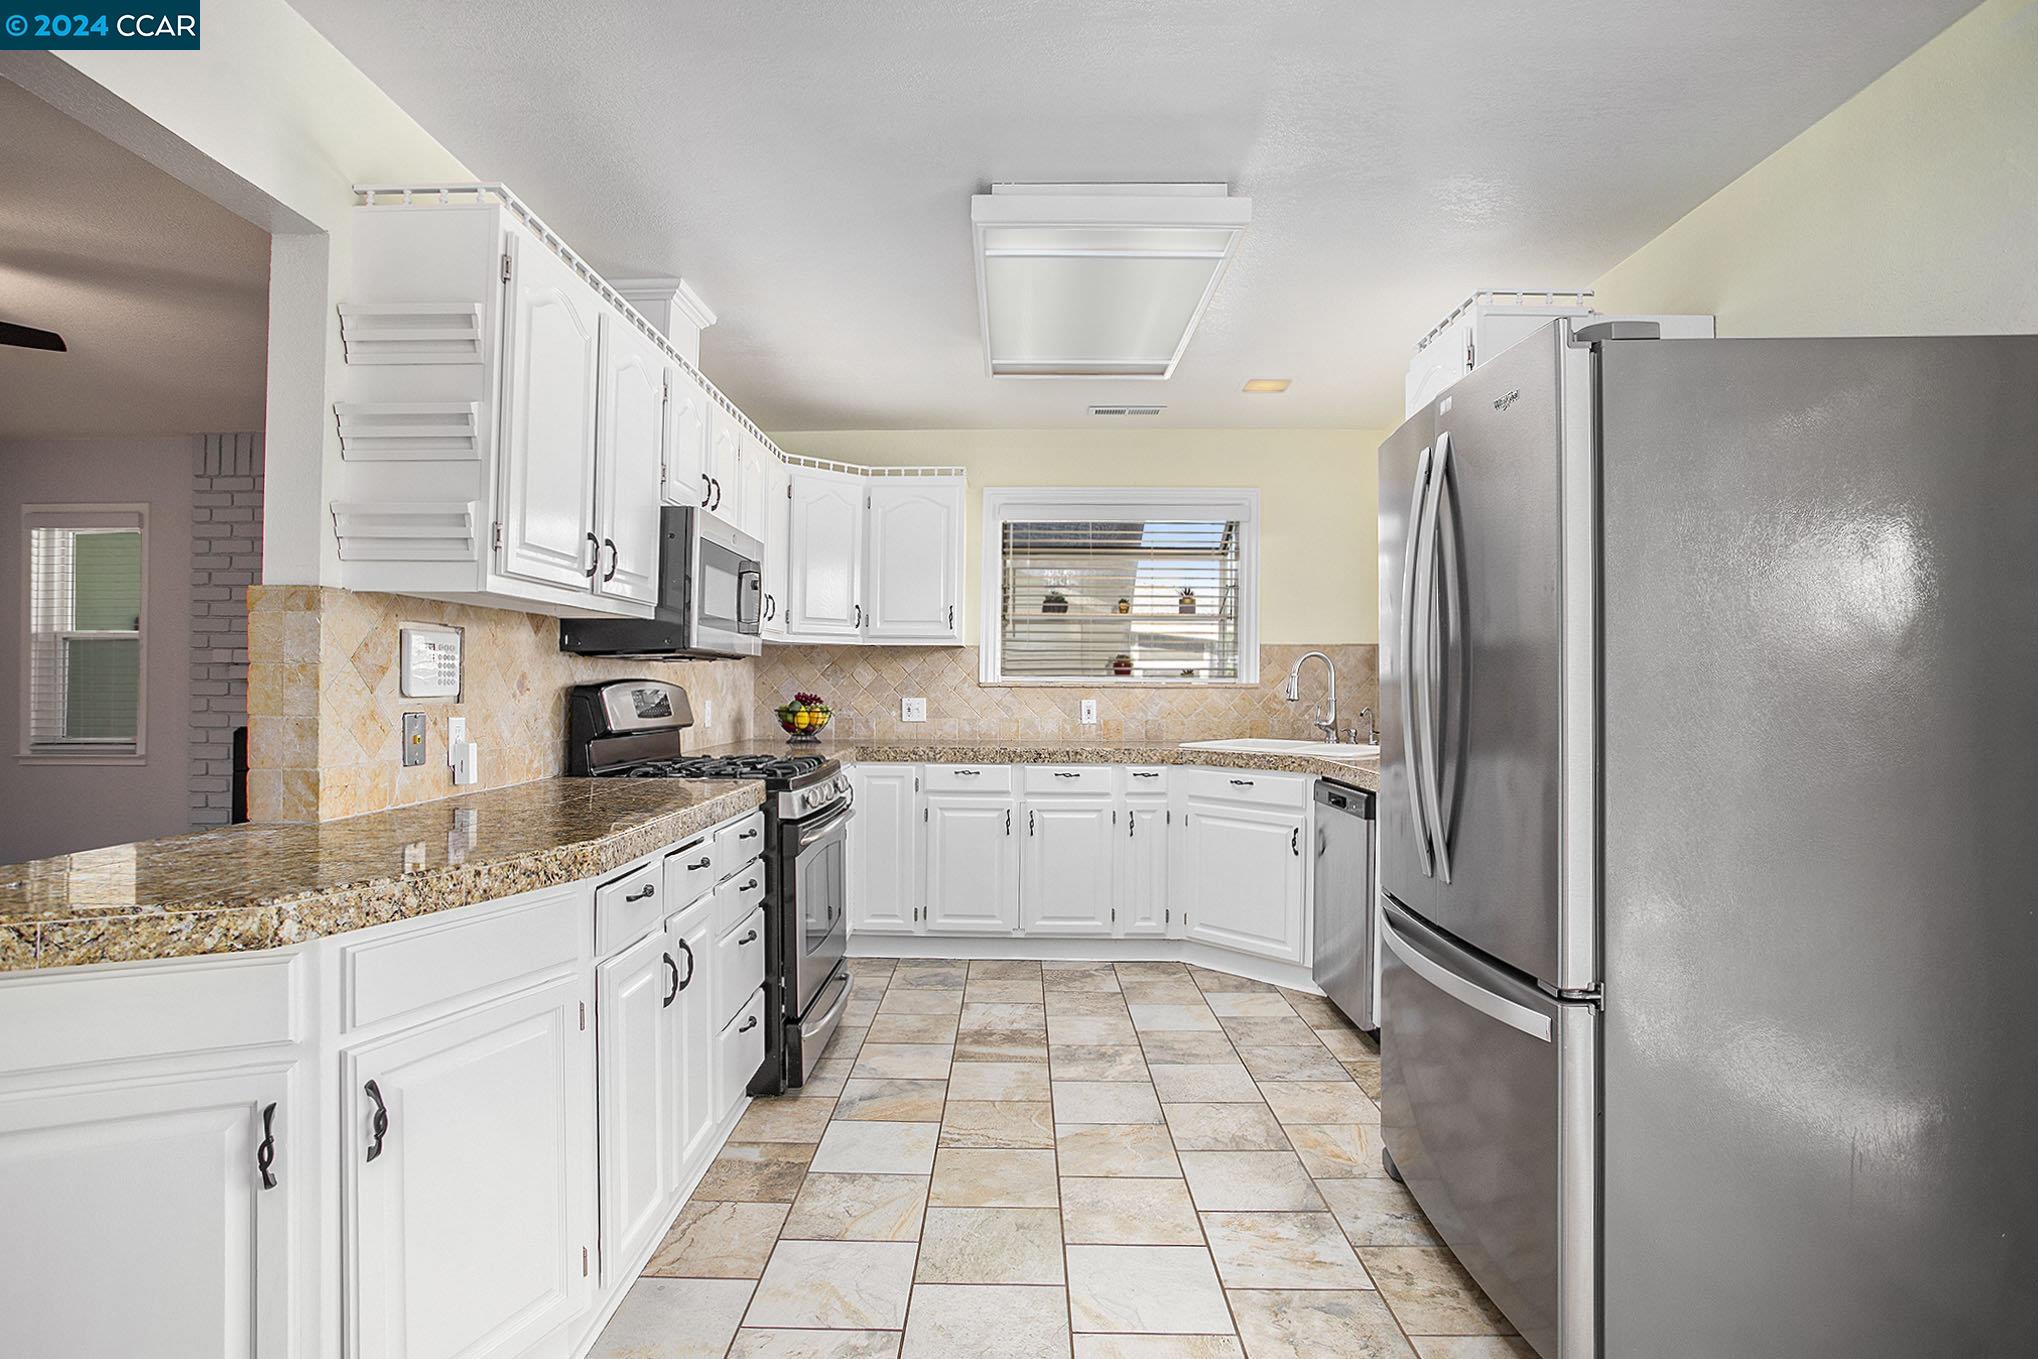 Beautiful stainless appliances, garden window and stone tile countertops.  Plenty of Cabinet space